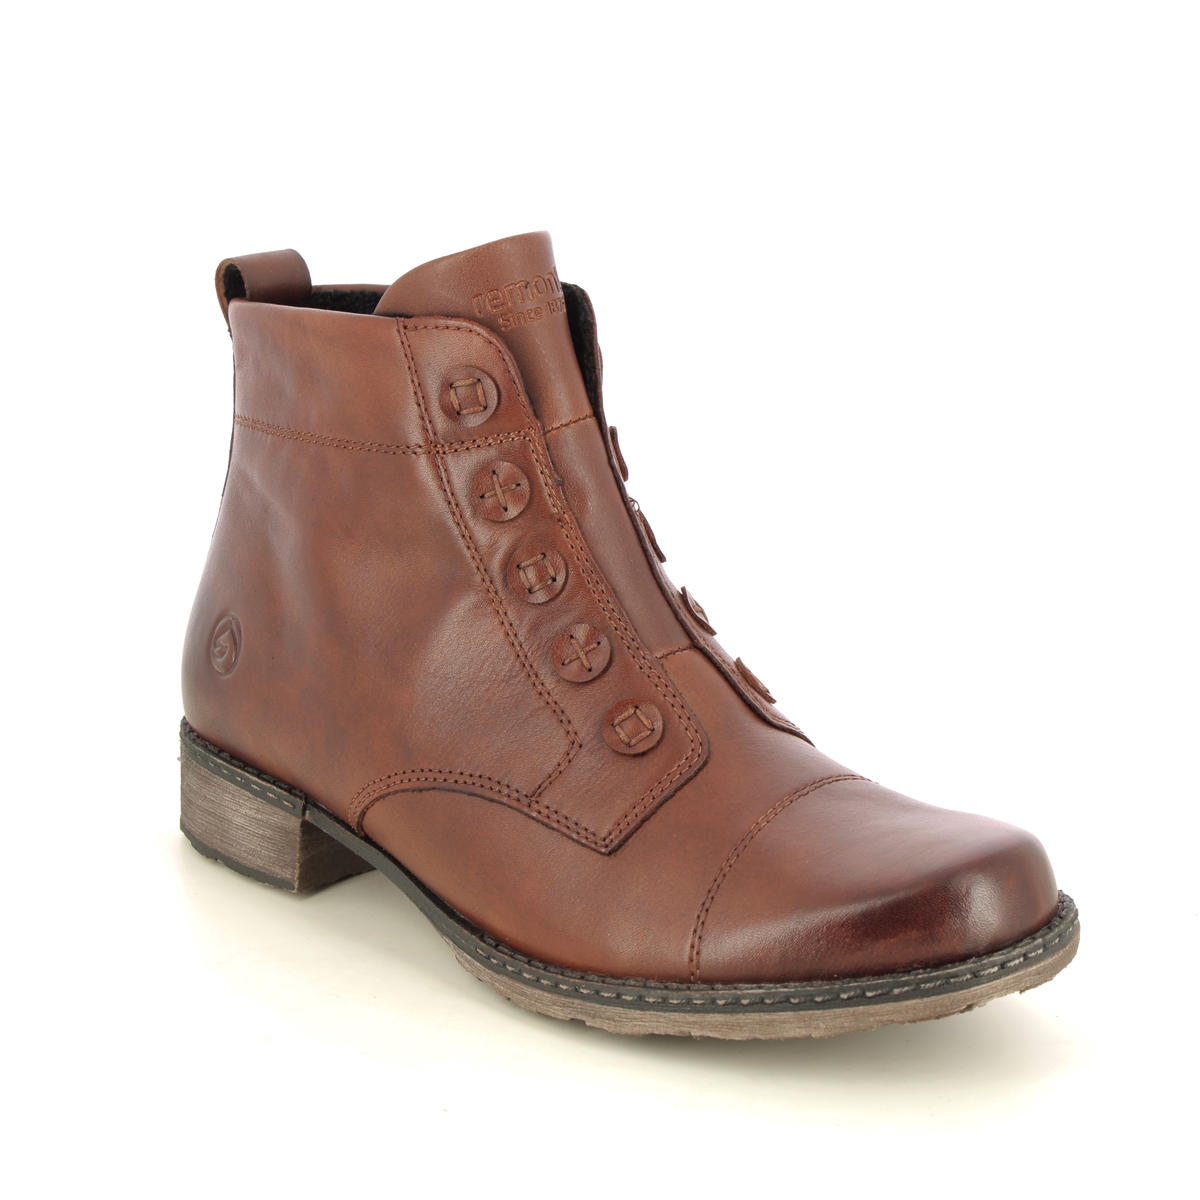 Remonte Peesibut Brown Leather Womens Ankle Boots D4392-22 In Size 37 In Plain Brown Leather